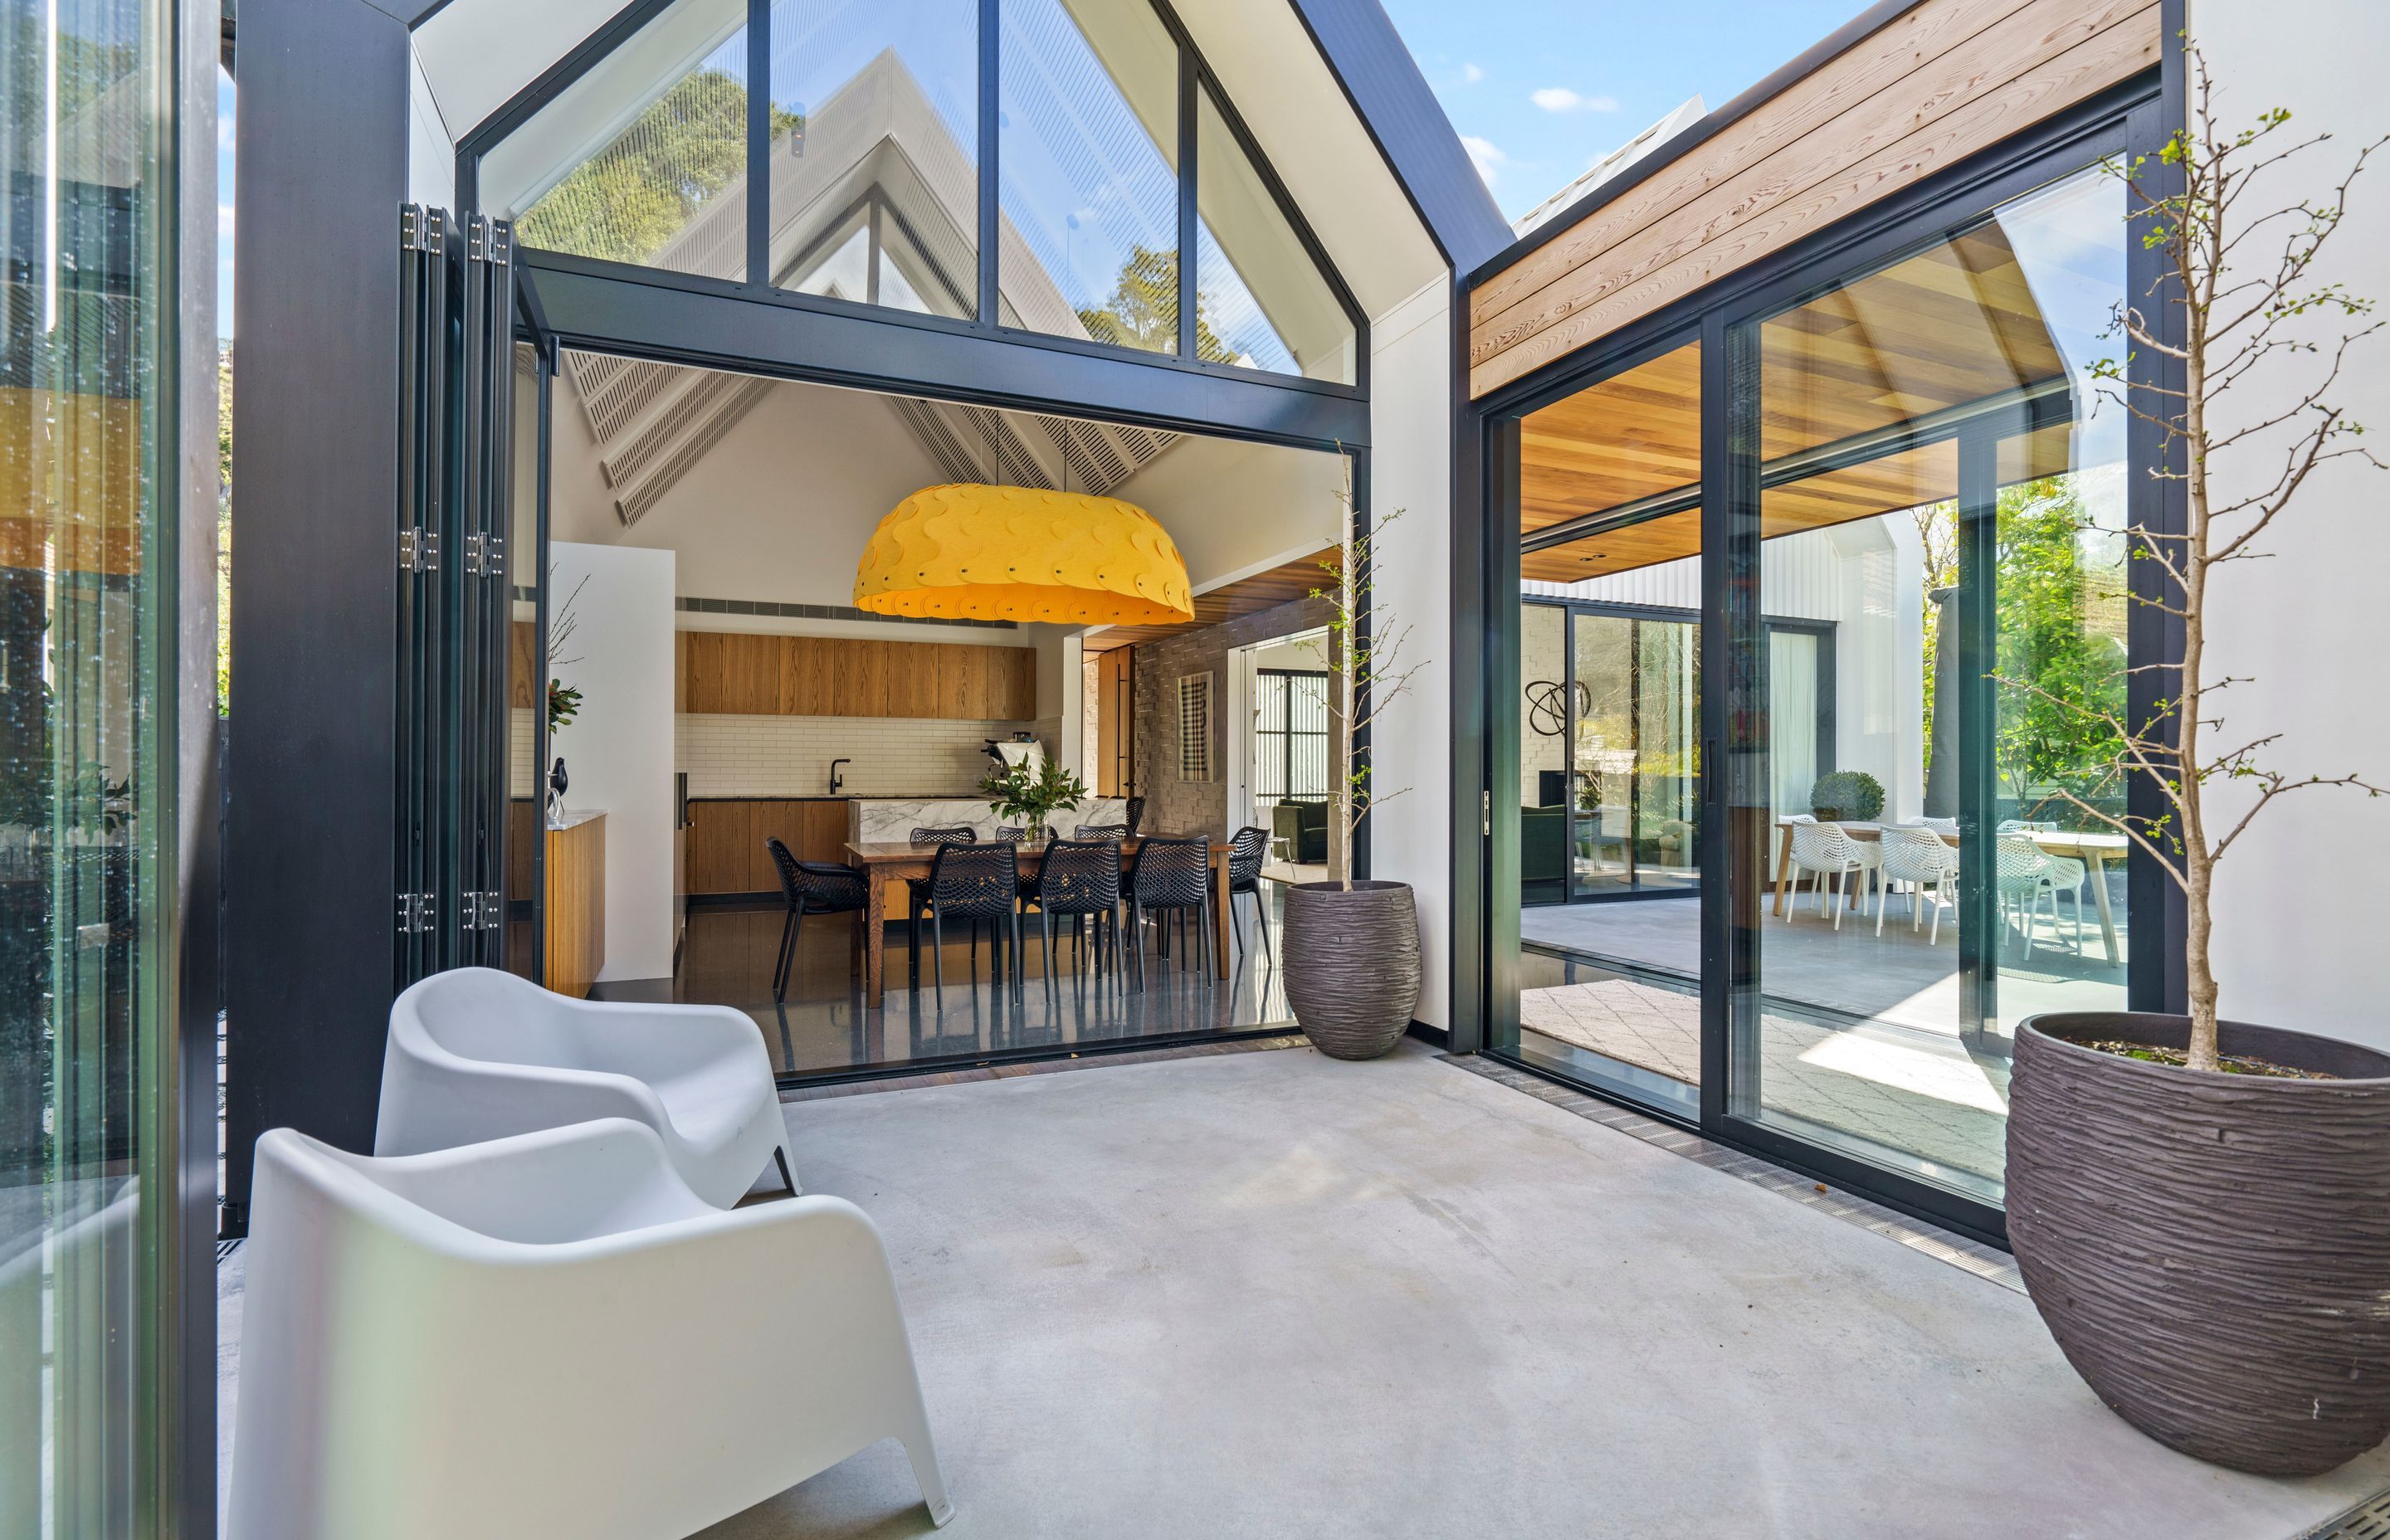 A small courtyard space adds a zen-like zone to the living area and allows for natural cross-ventilation of the home.